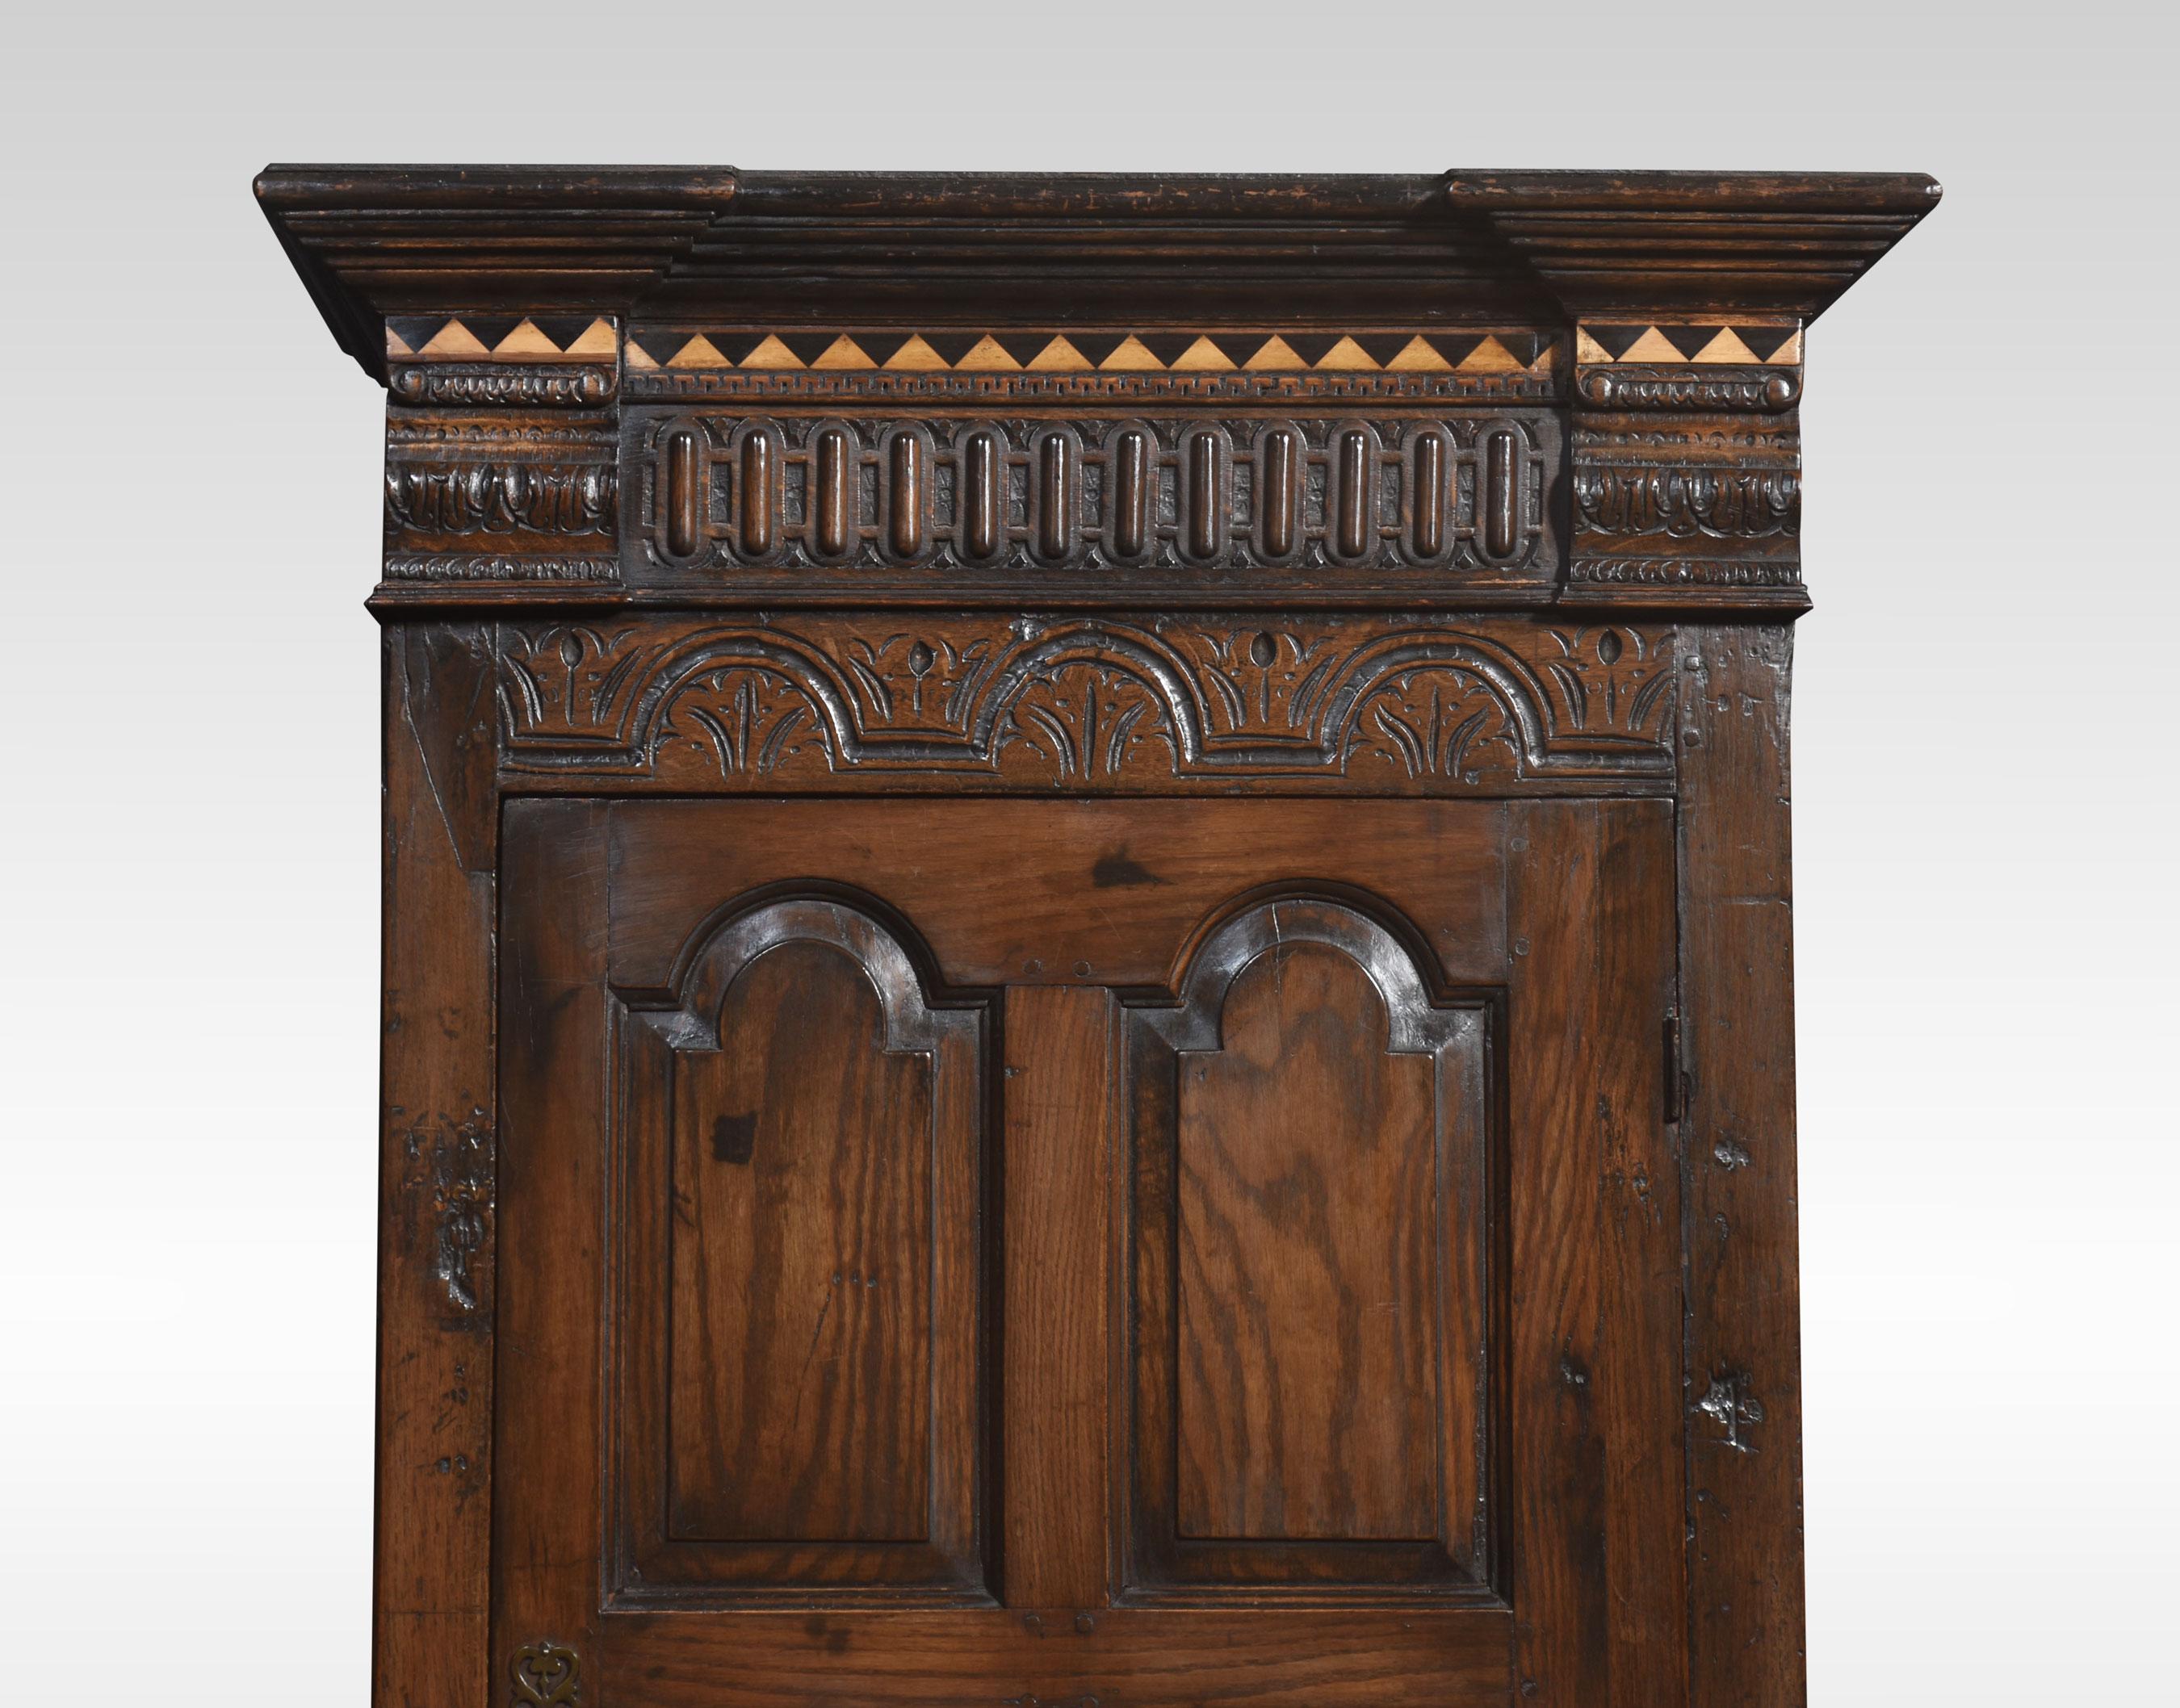 Oak single-door wardrobe in the 17th Century style, the inverted breakfron cornice above carved detail. To the large oak panelled door opening to reveal a large hanging area. All raised on bracket feet.
Dimensions
Height 73.5 Inches
Width 33.5